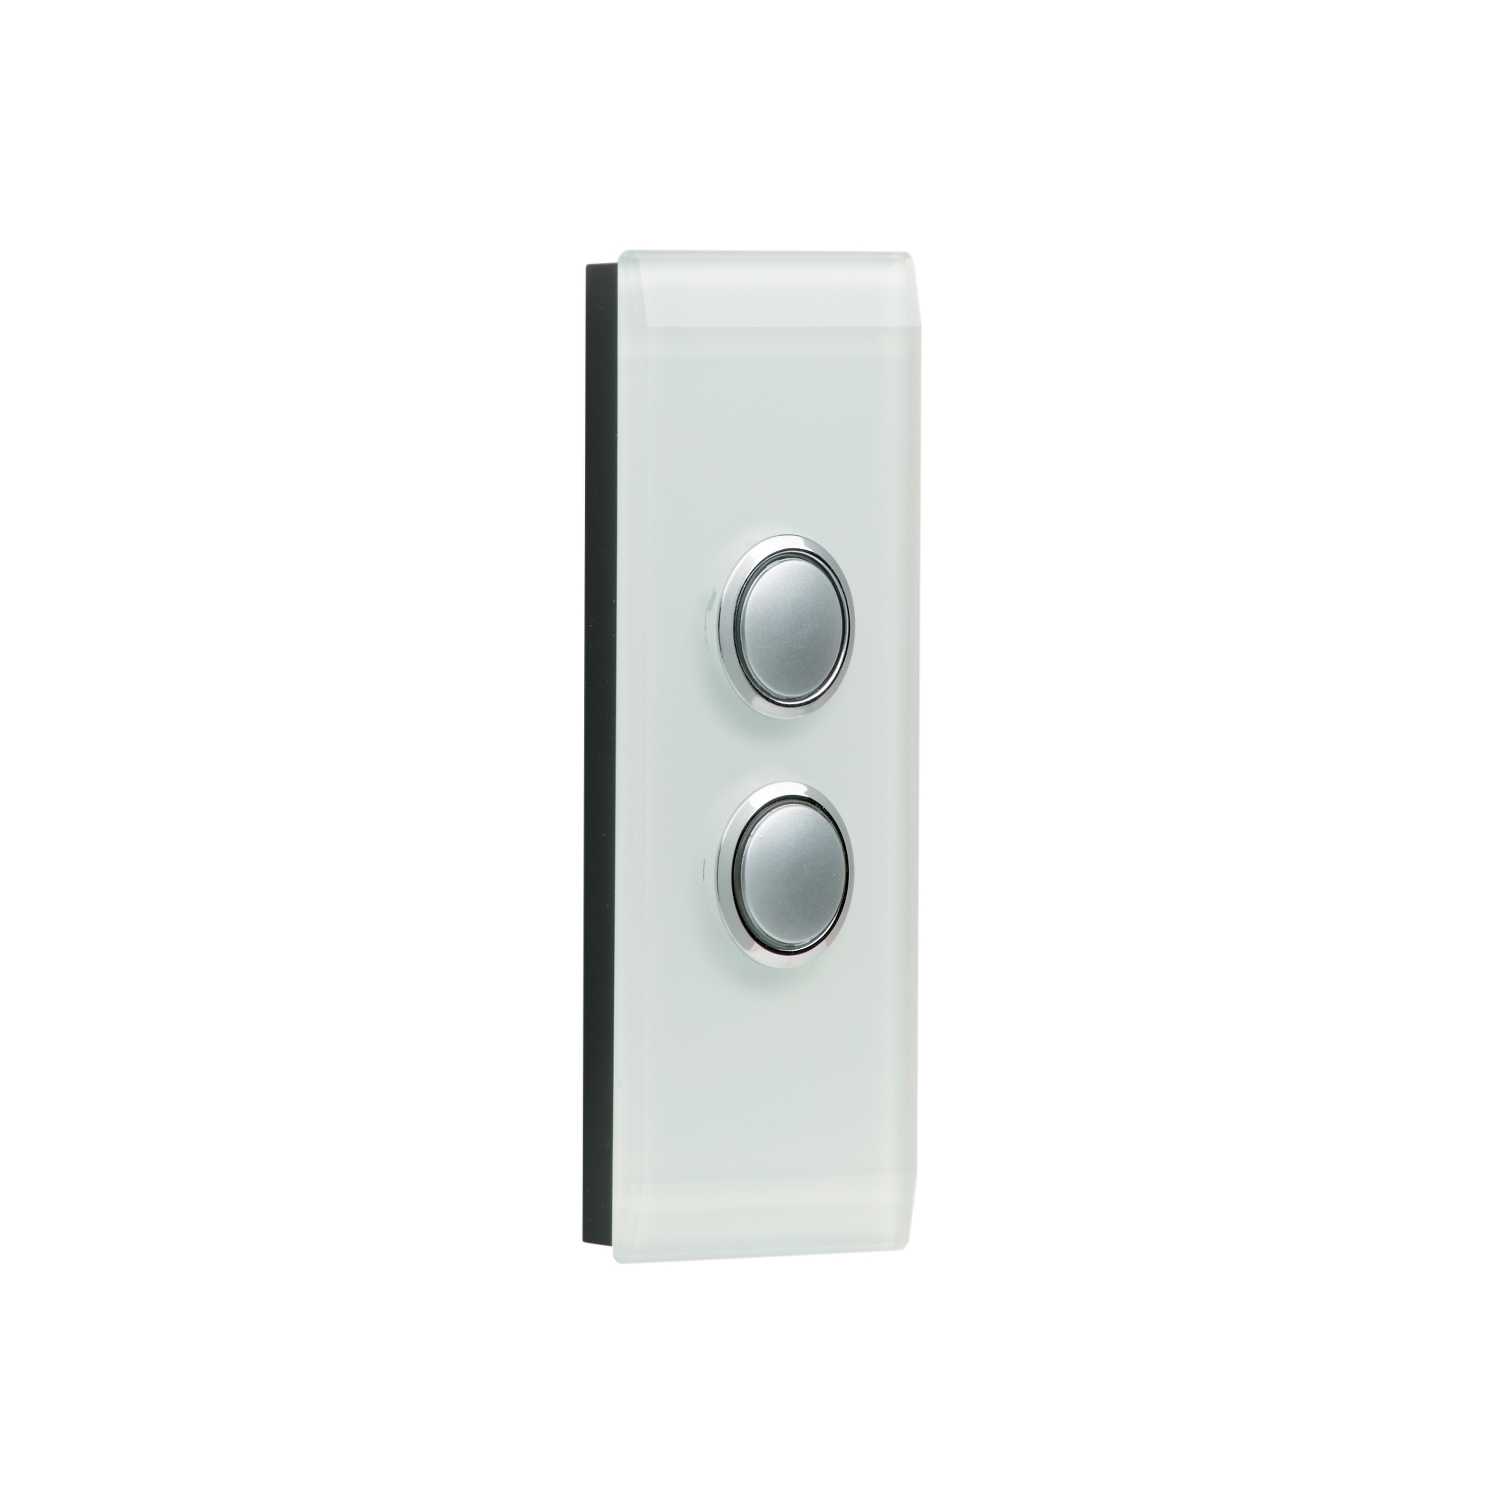 Grid Plate and Cover Switch, Less Mechanism, Architrave, 2 Gang